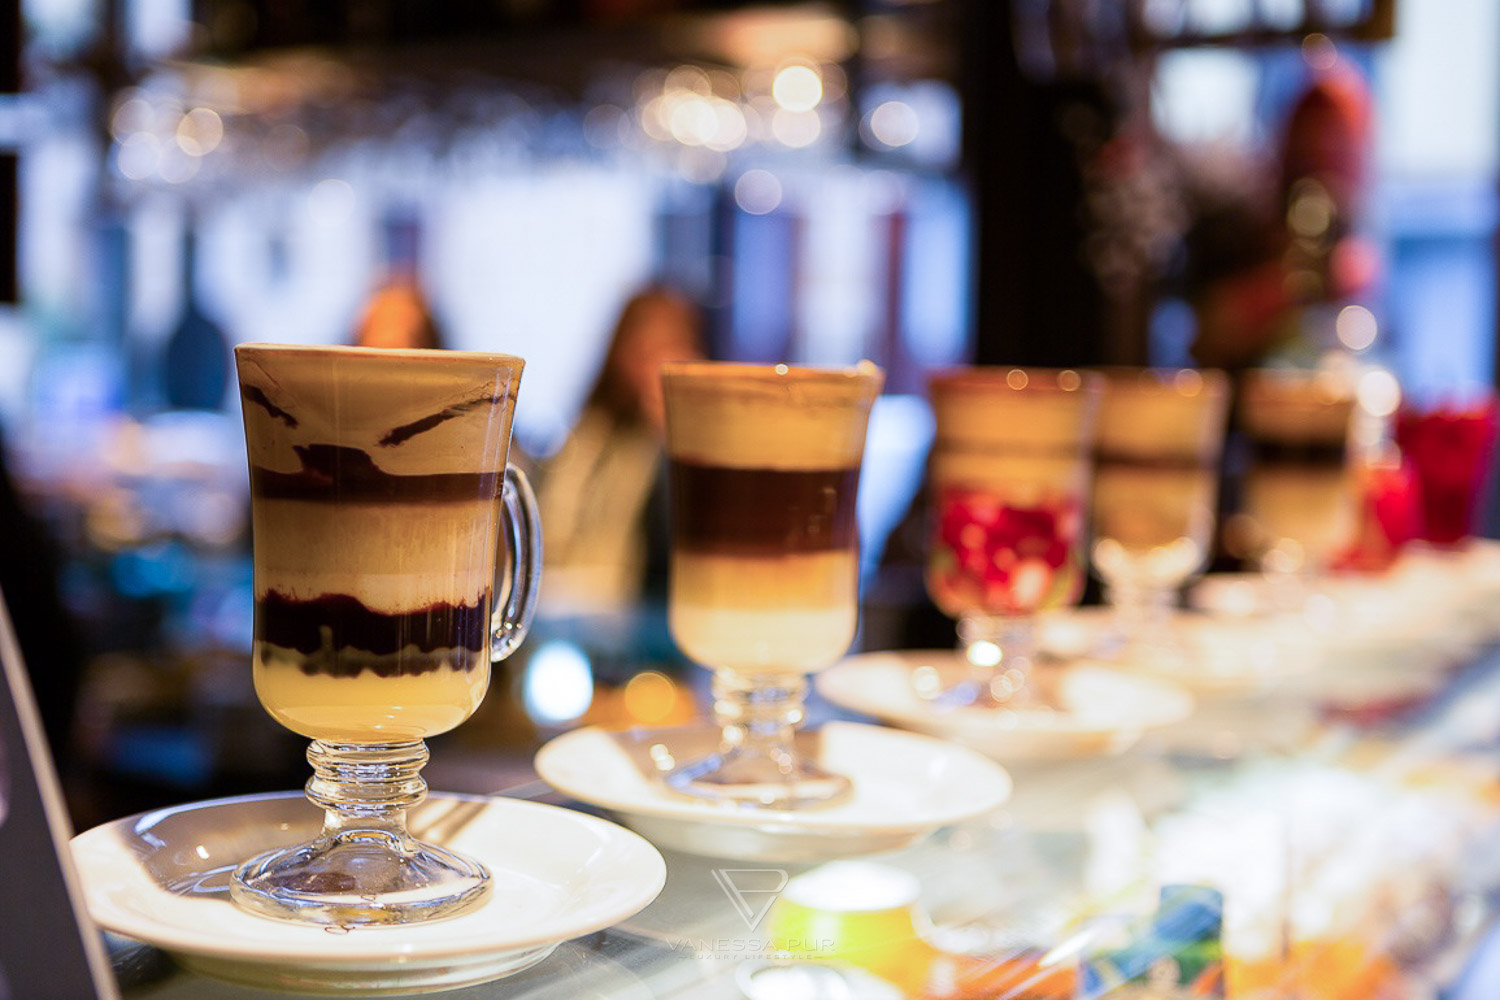 Madrid top 10 restaurants for tapas and sweets - Sightseeing - Mercado de San Miguel - Madrid, Spain - Tapas, Bars and Entertainment